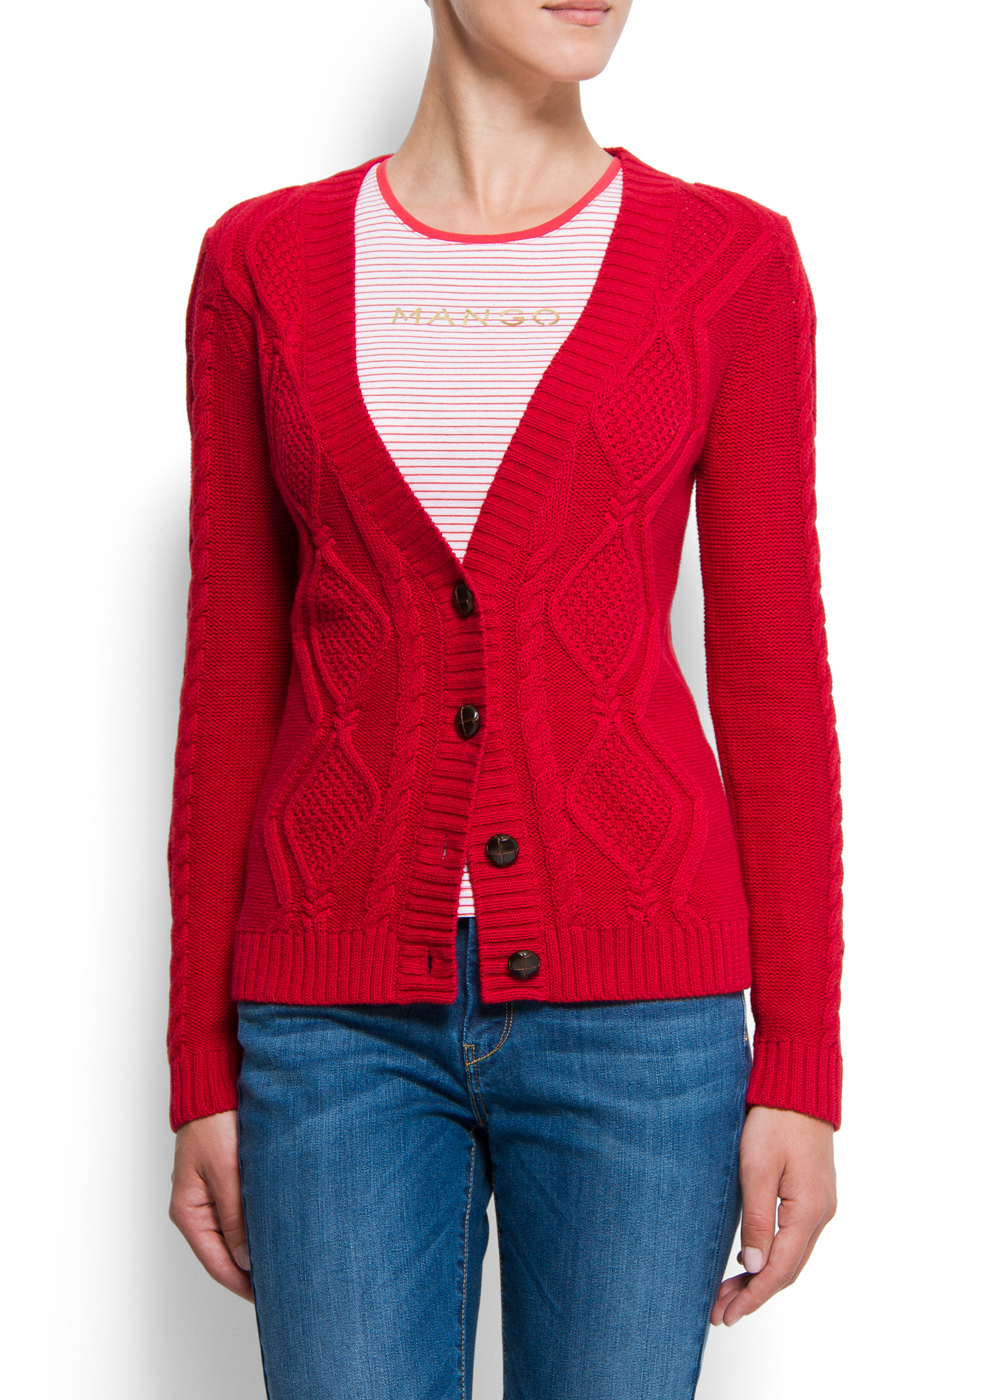 Lyst - Mango Cable Knit Cotton Cardigan in Red